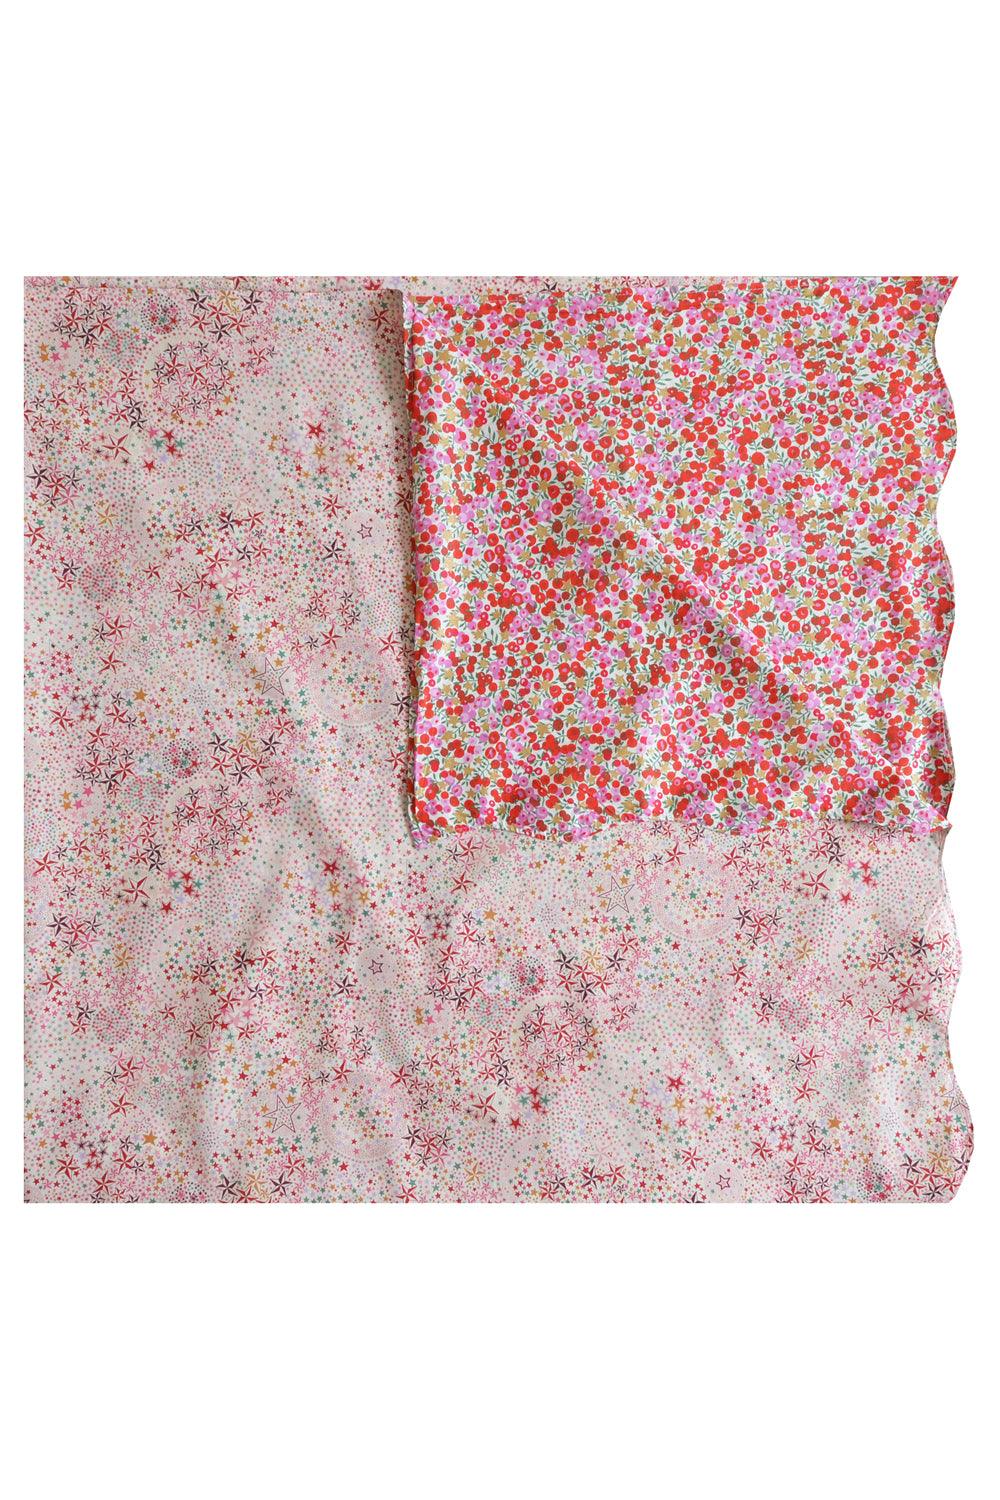 Reversible Wavy Tablecloth made with Liberty Fabric ADELAJDA'S WISH & WILTSHIRE STAR - Coco & Wolf